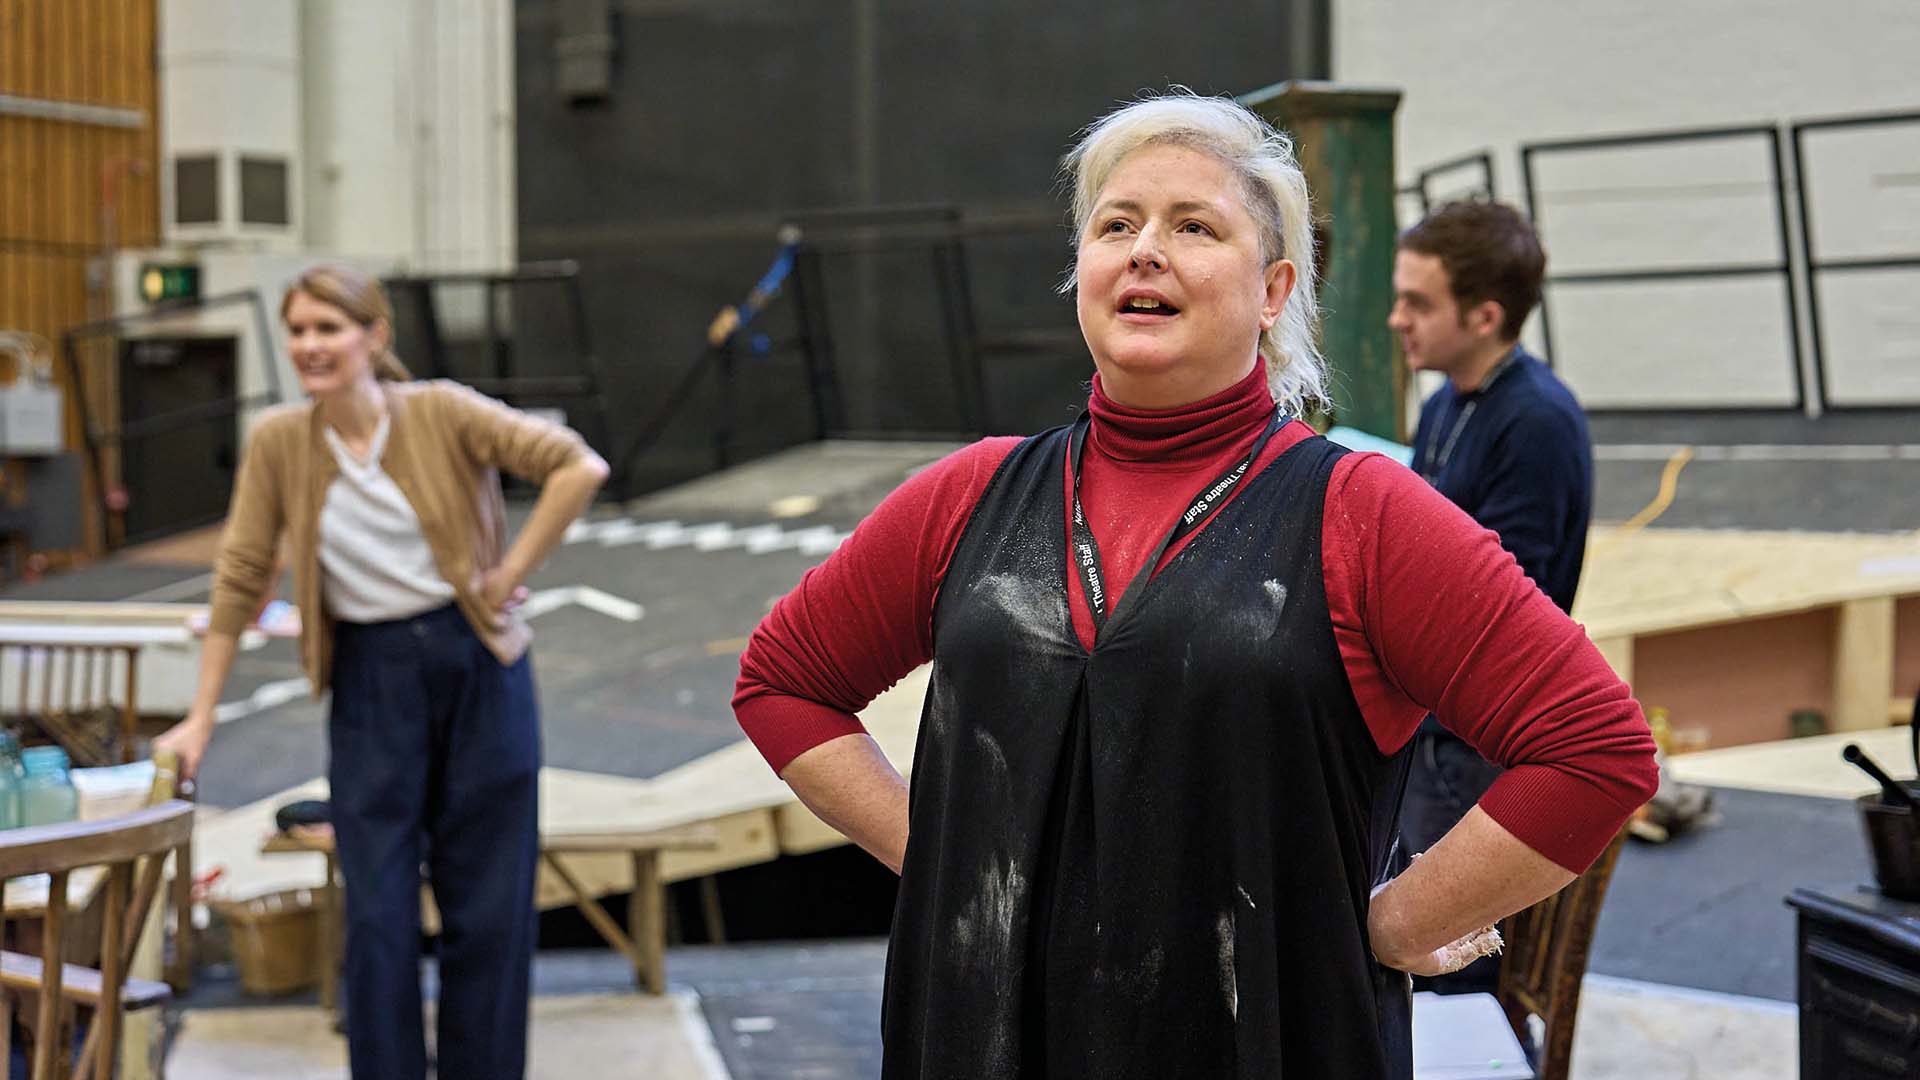 McSweeney in rehearsal at the National Theatre